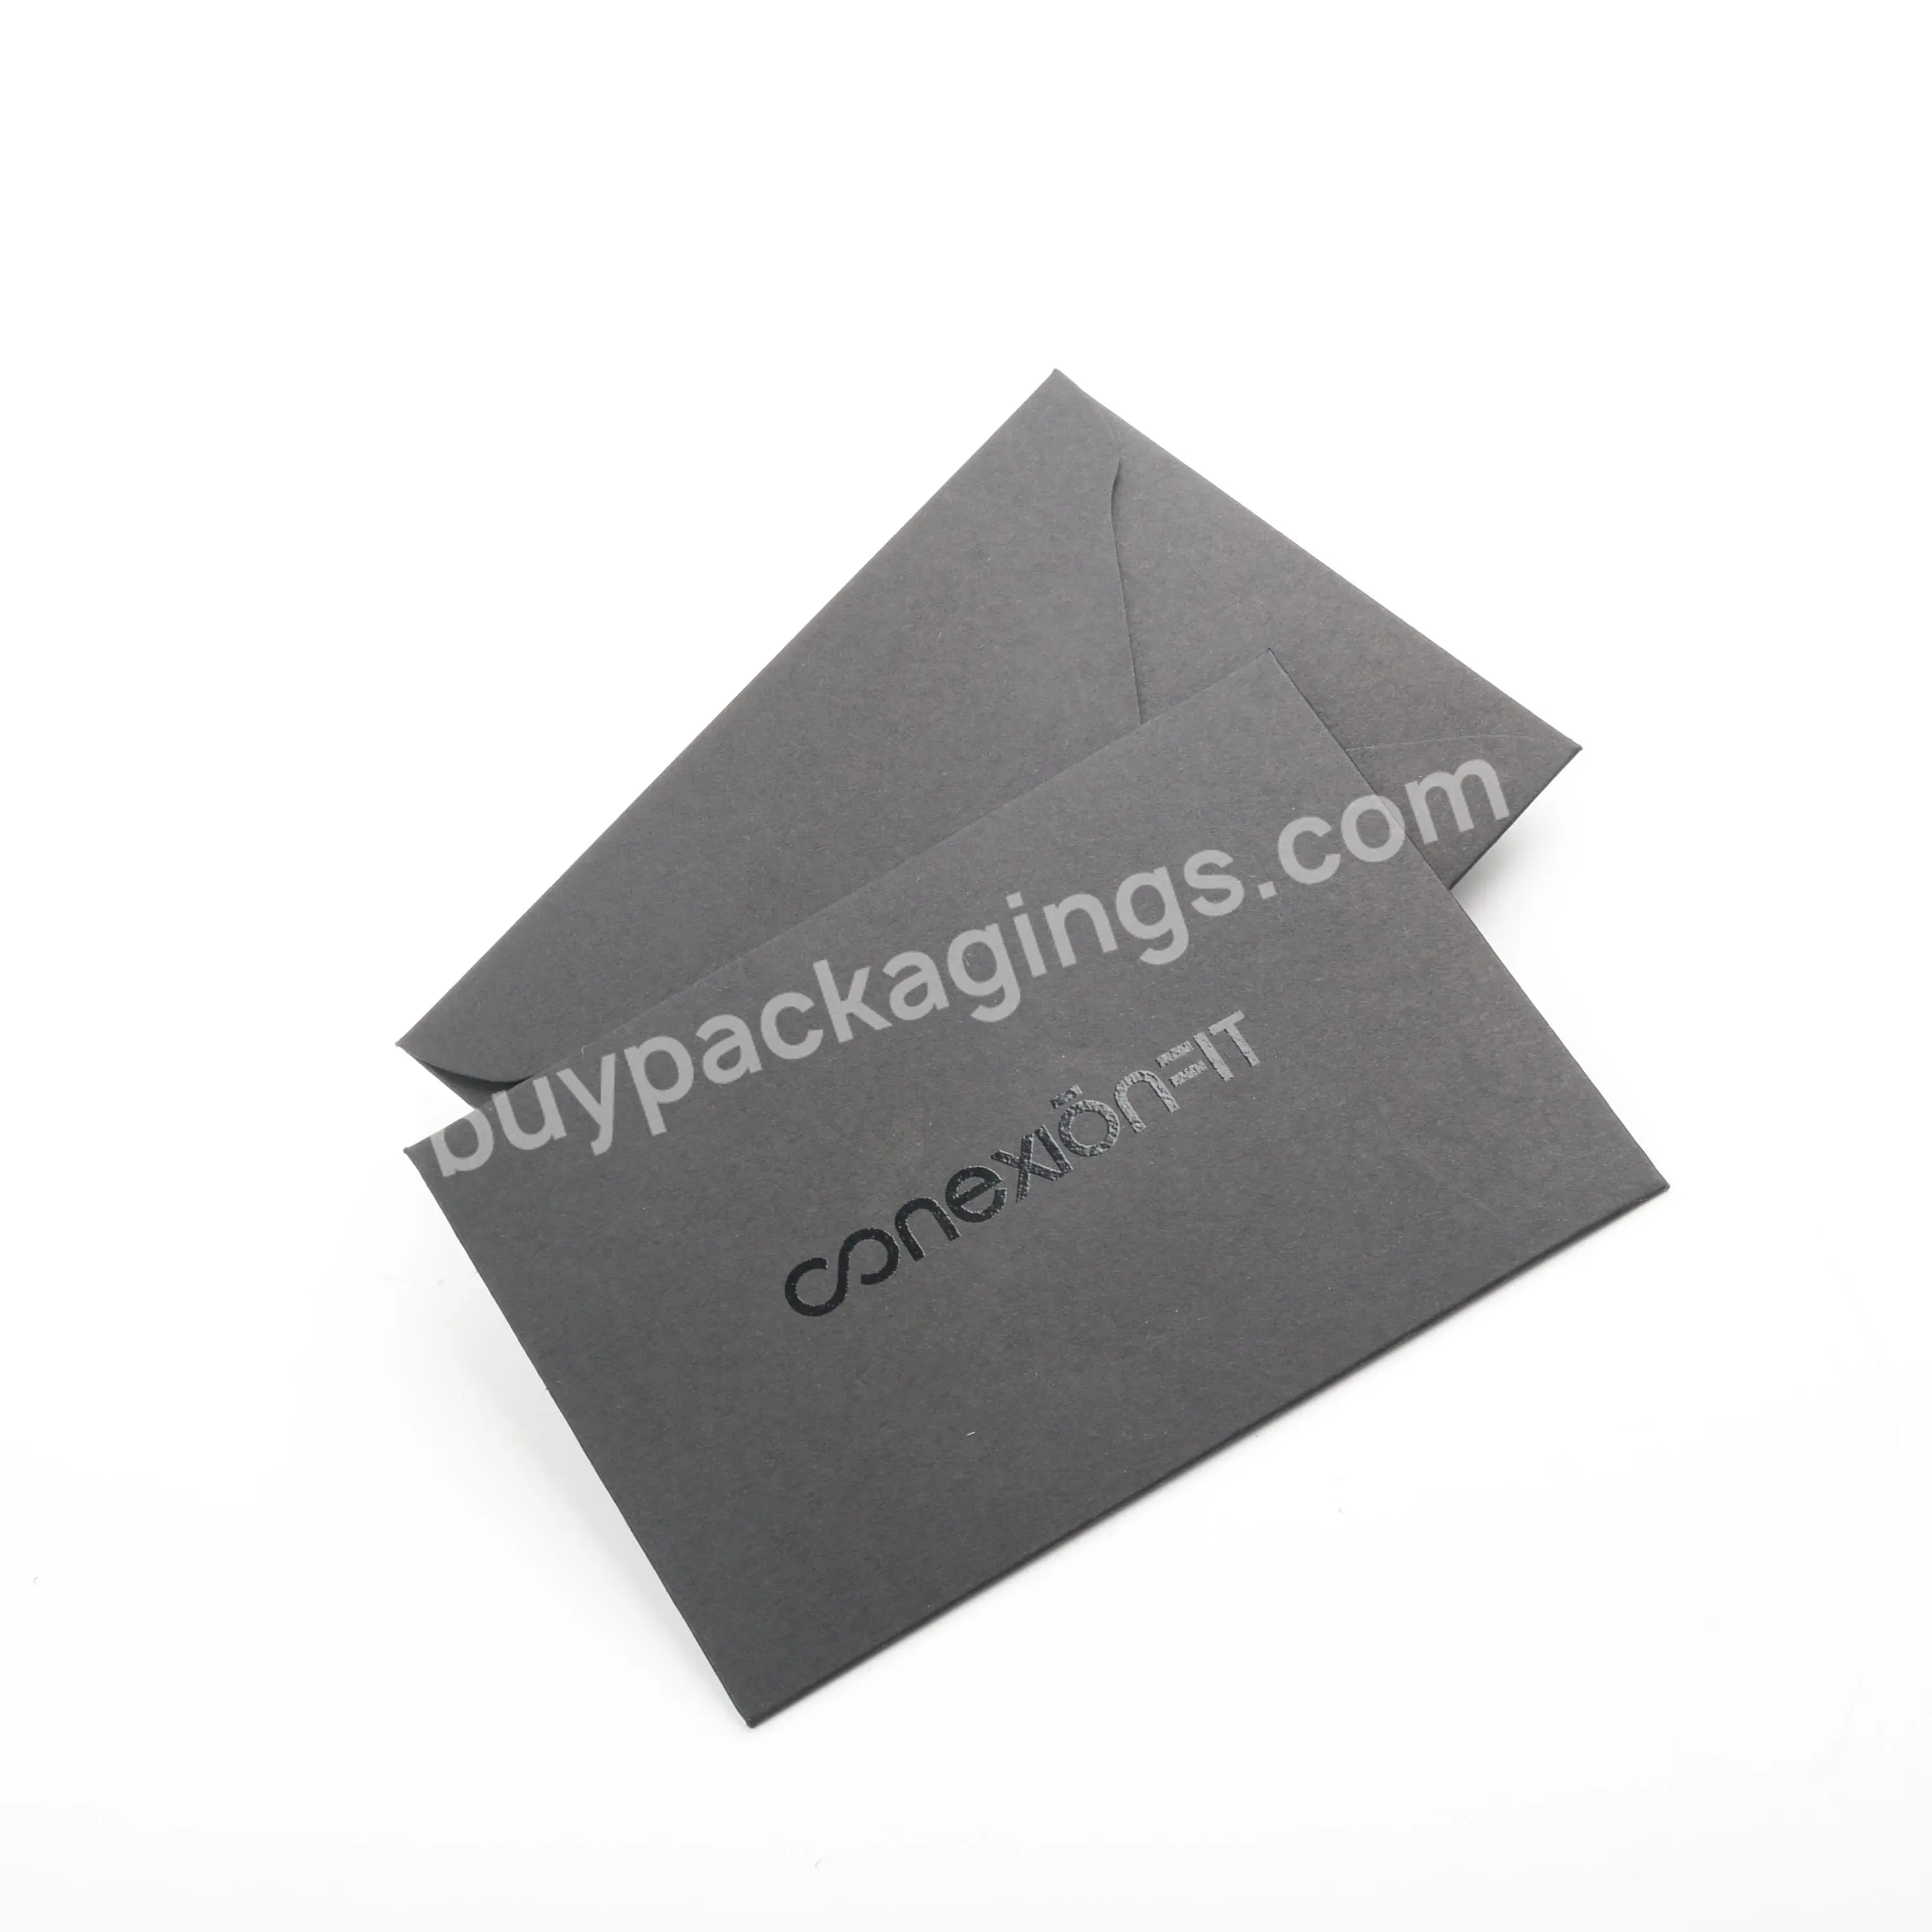 New Product Thank You Cards 100 Pieces Paper Card Envelopes With Envelopes For Friends - Buy 100 Pieces Paper Card Envelopes,New Product Thank You Cards,Black Envelope.